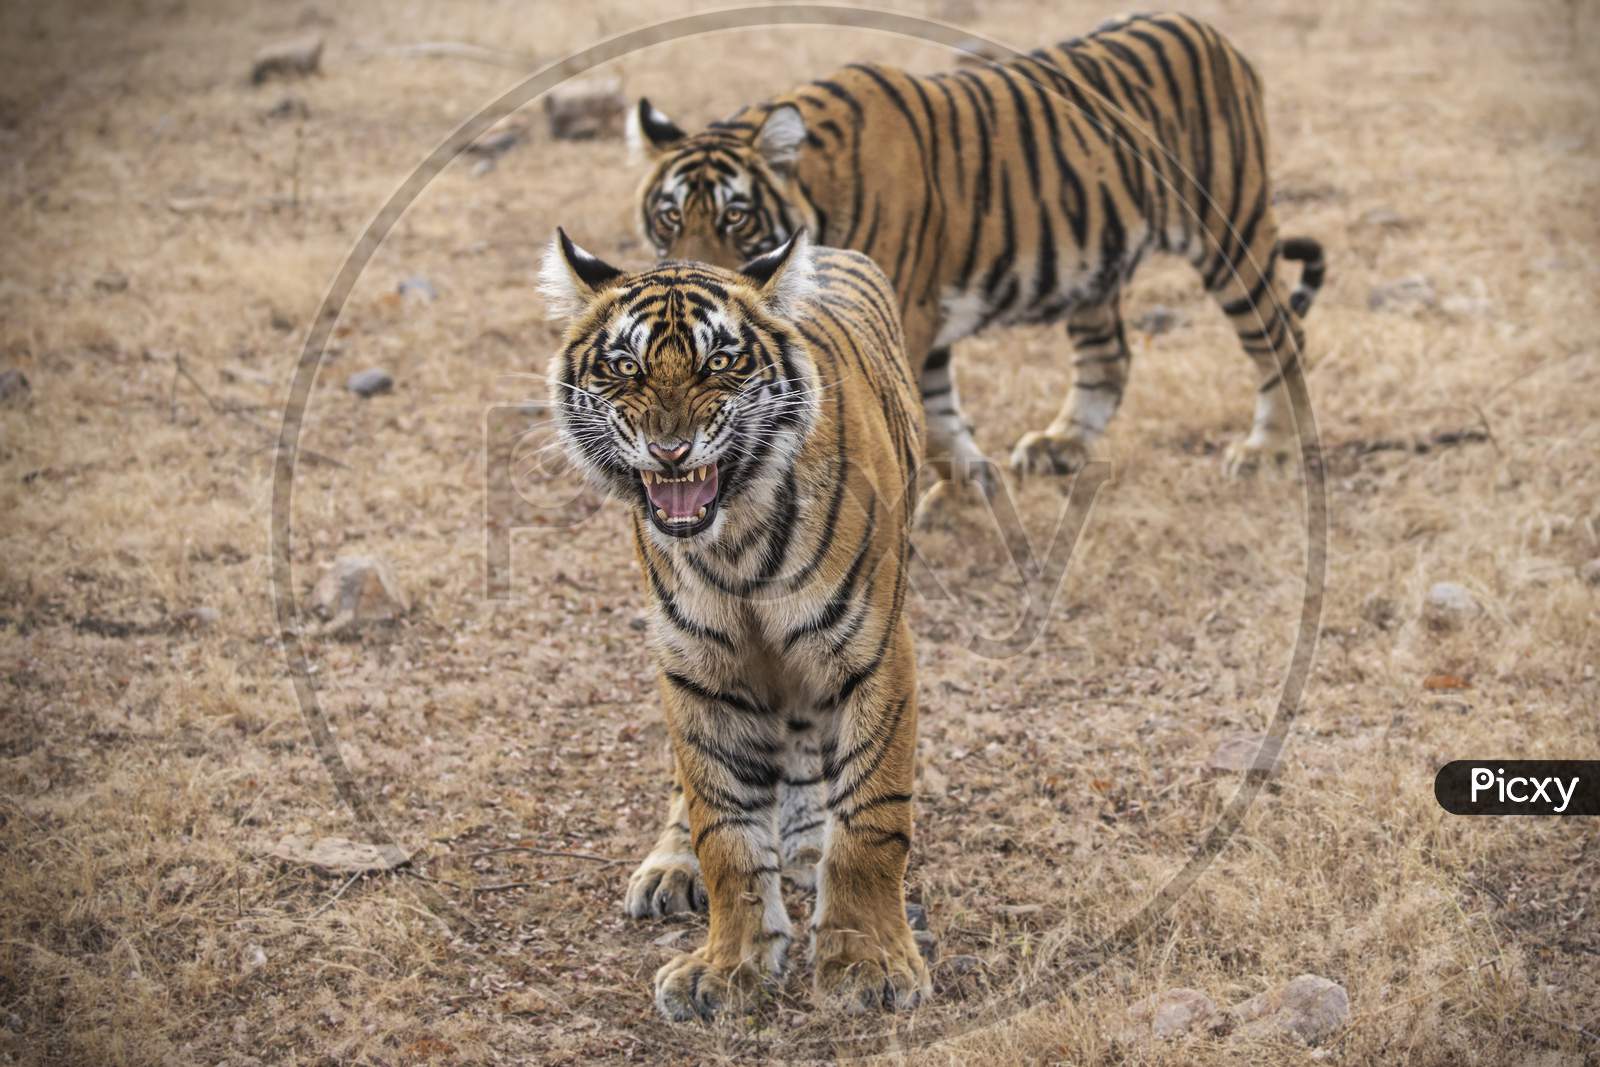 A couple of Roaring Tigers in a Forest